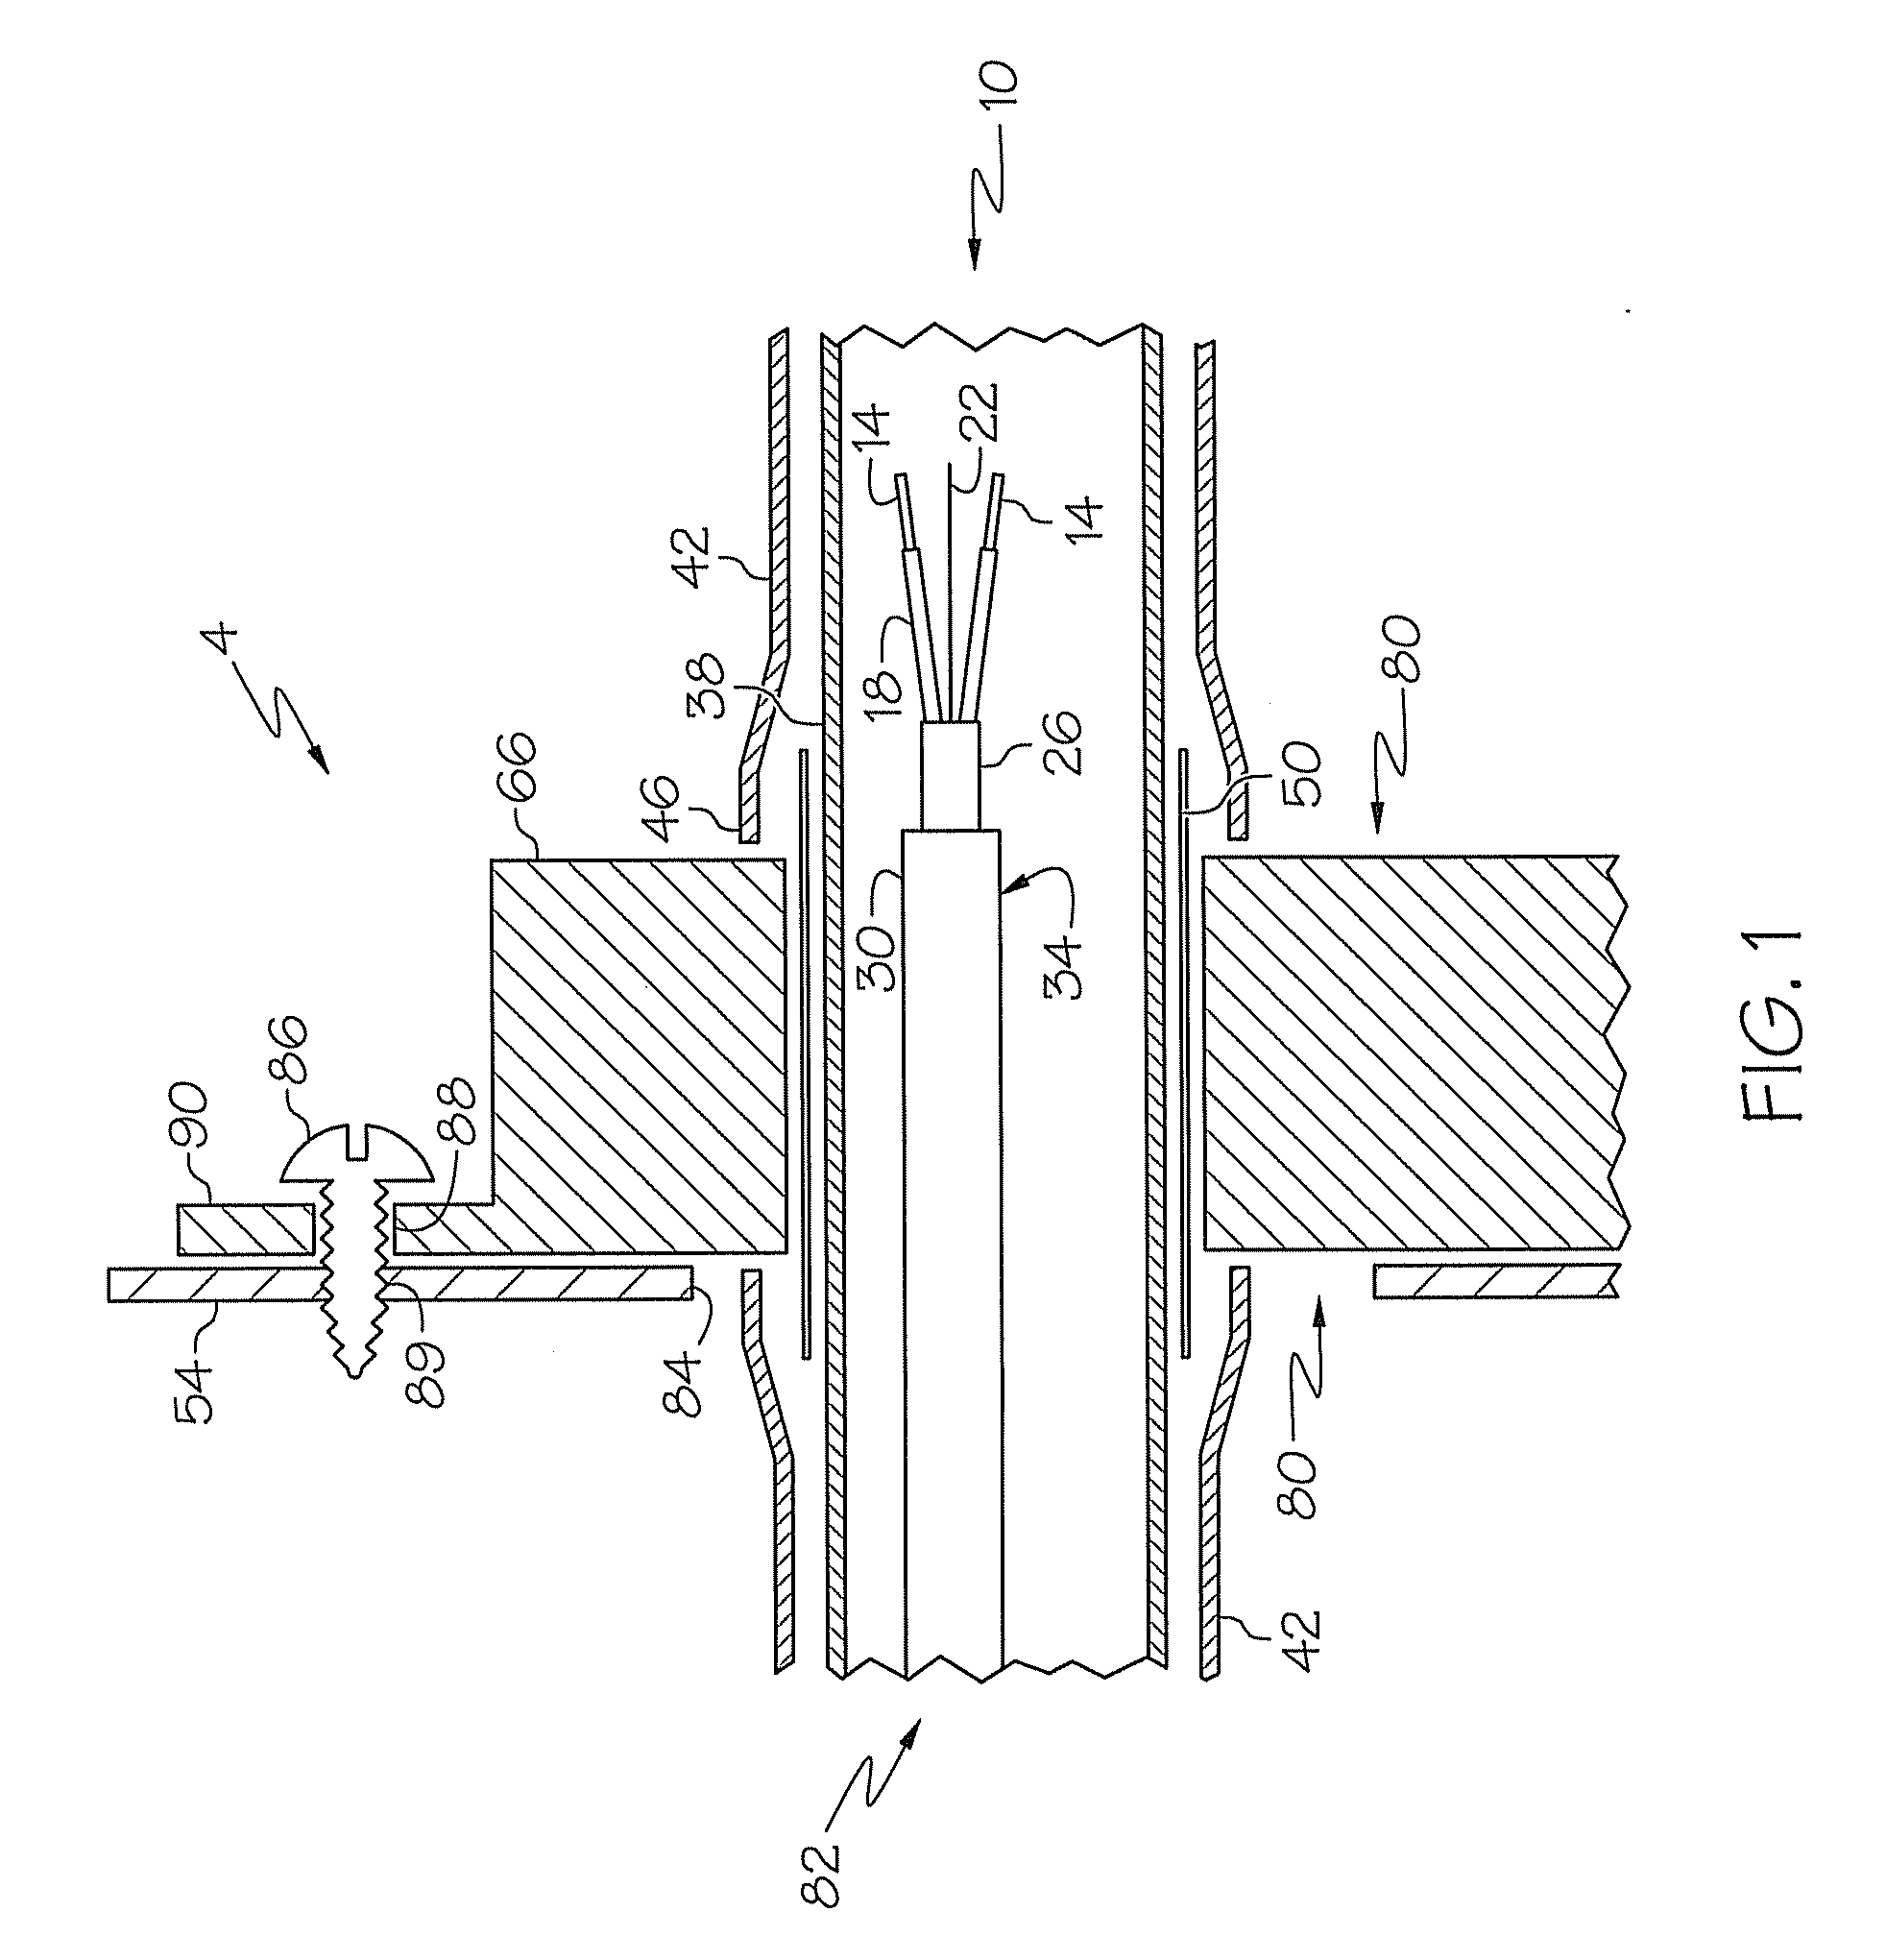 Method and system of feeding cable through an enclosure while maintaining electrognetic shielding